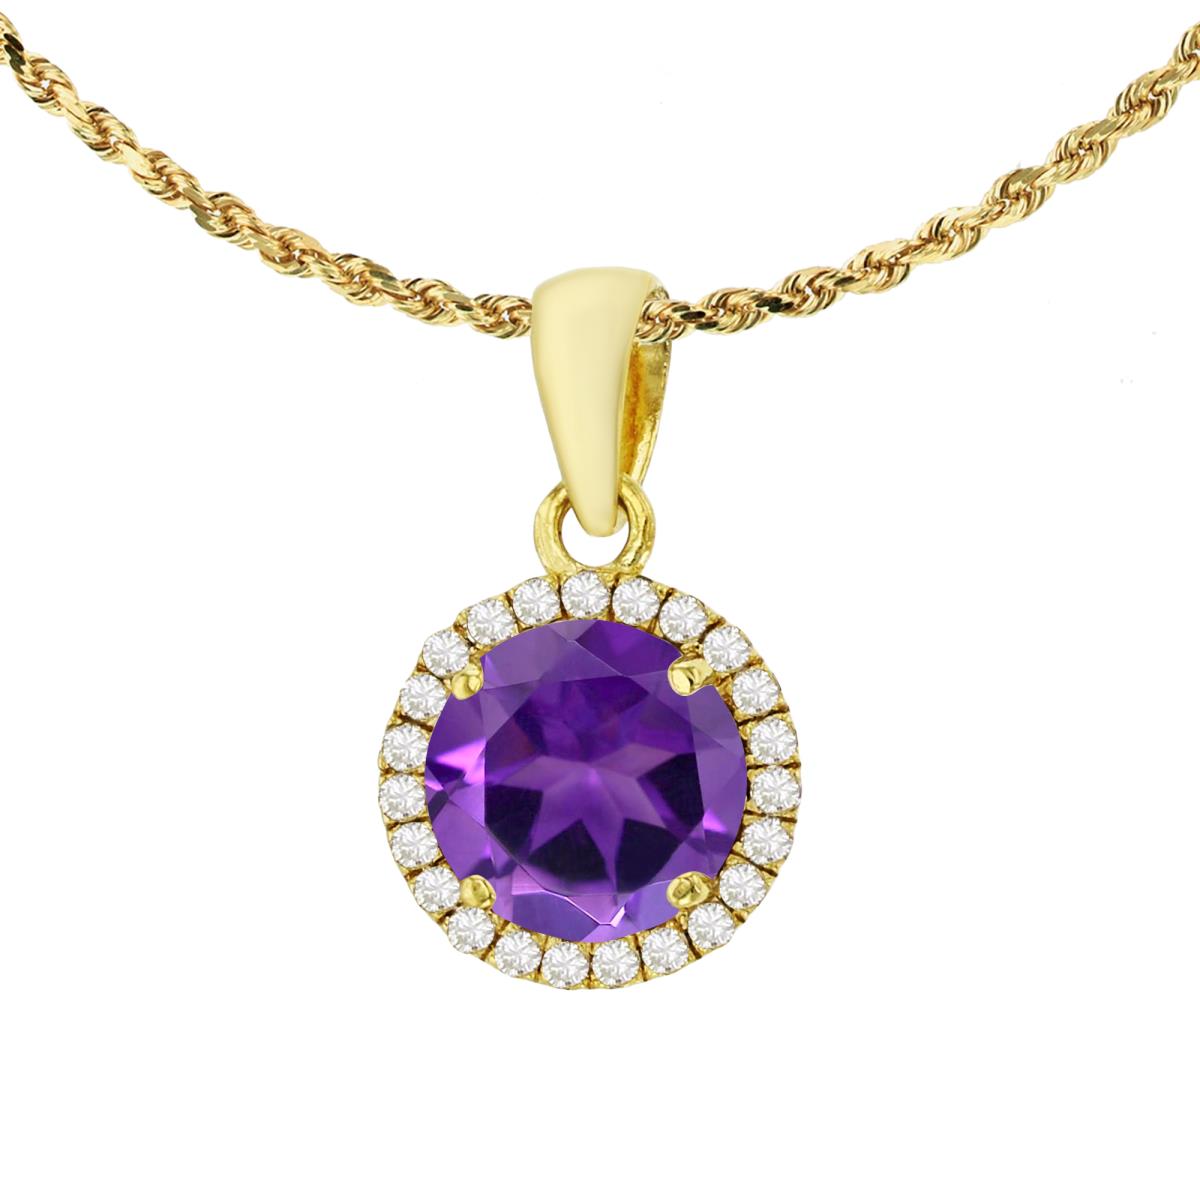 10K Yellow Gold 7mm Round Amethyst & 0.12 CTTW Diamond Halo 18" Rope Chain Necklace